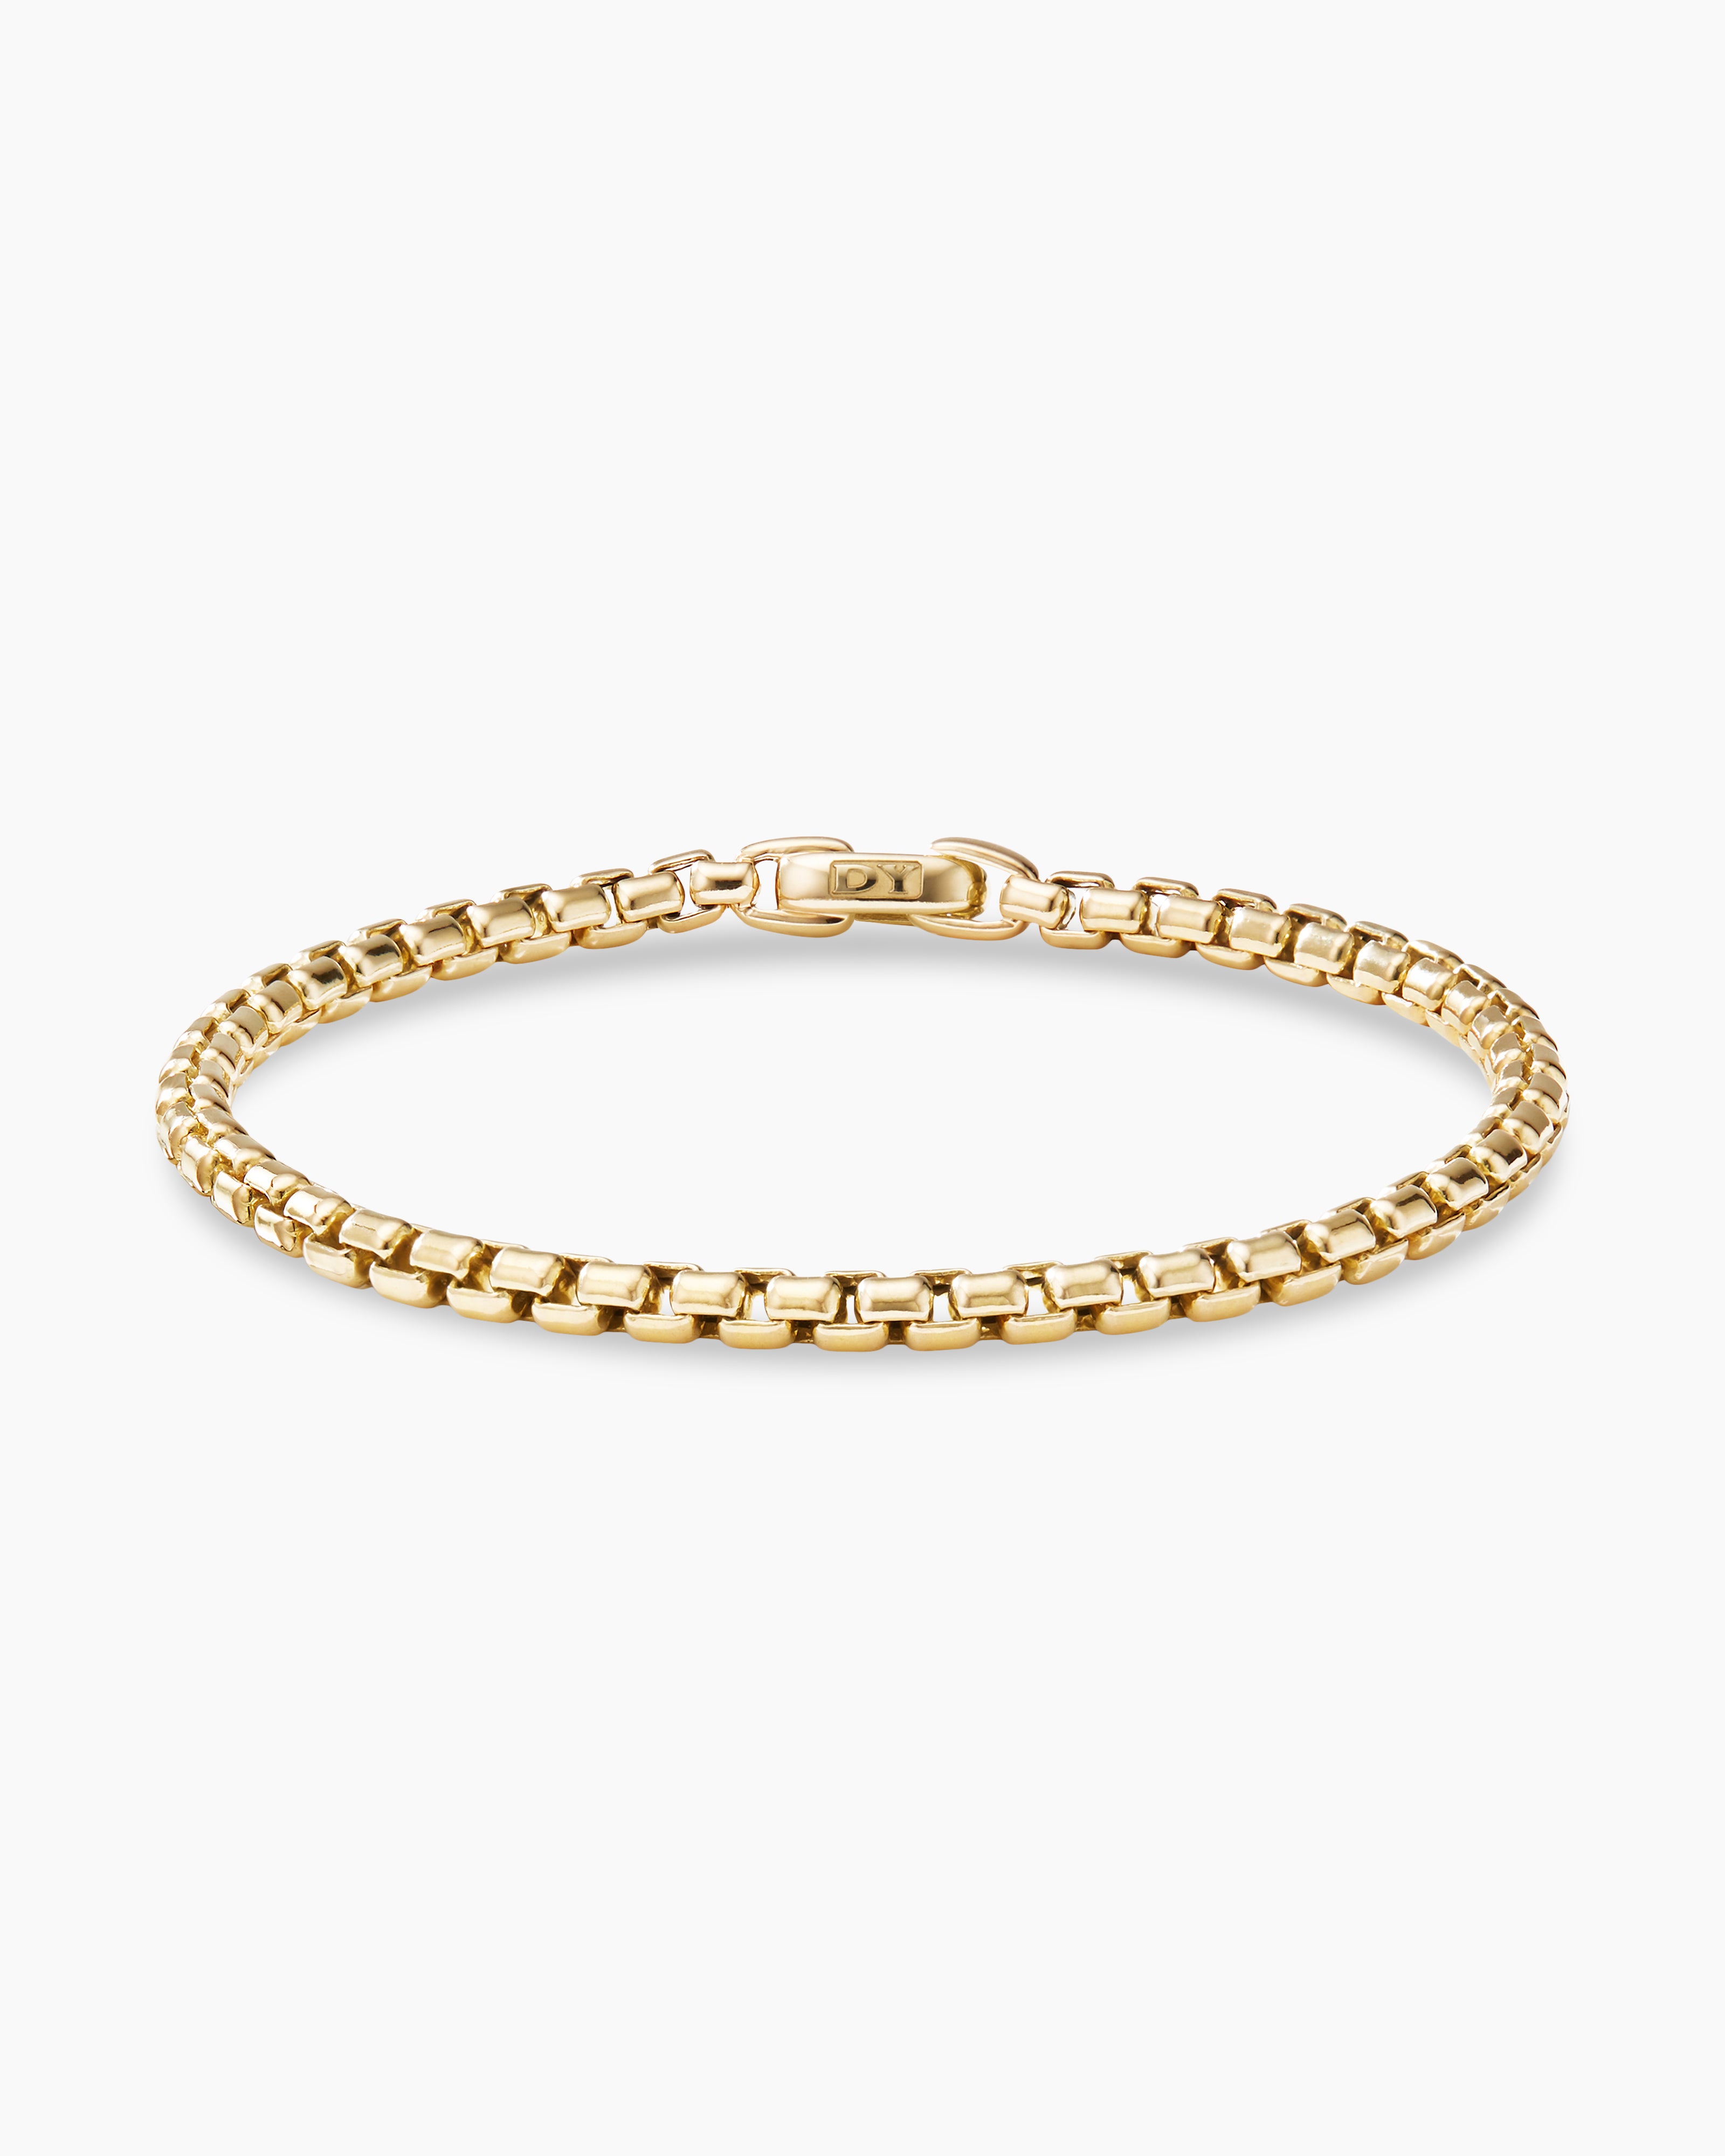 Shining Gold Bracelet For Mens And Womens Daily Wear BRAC415